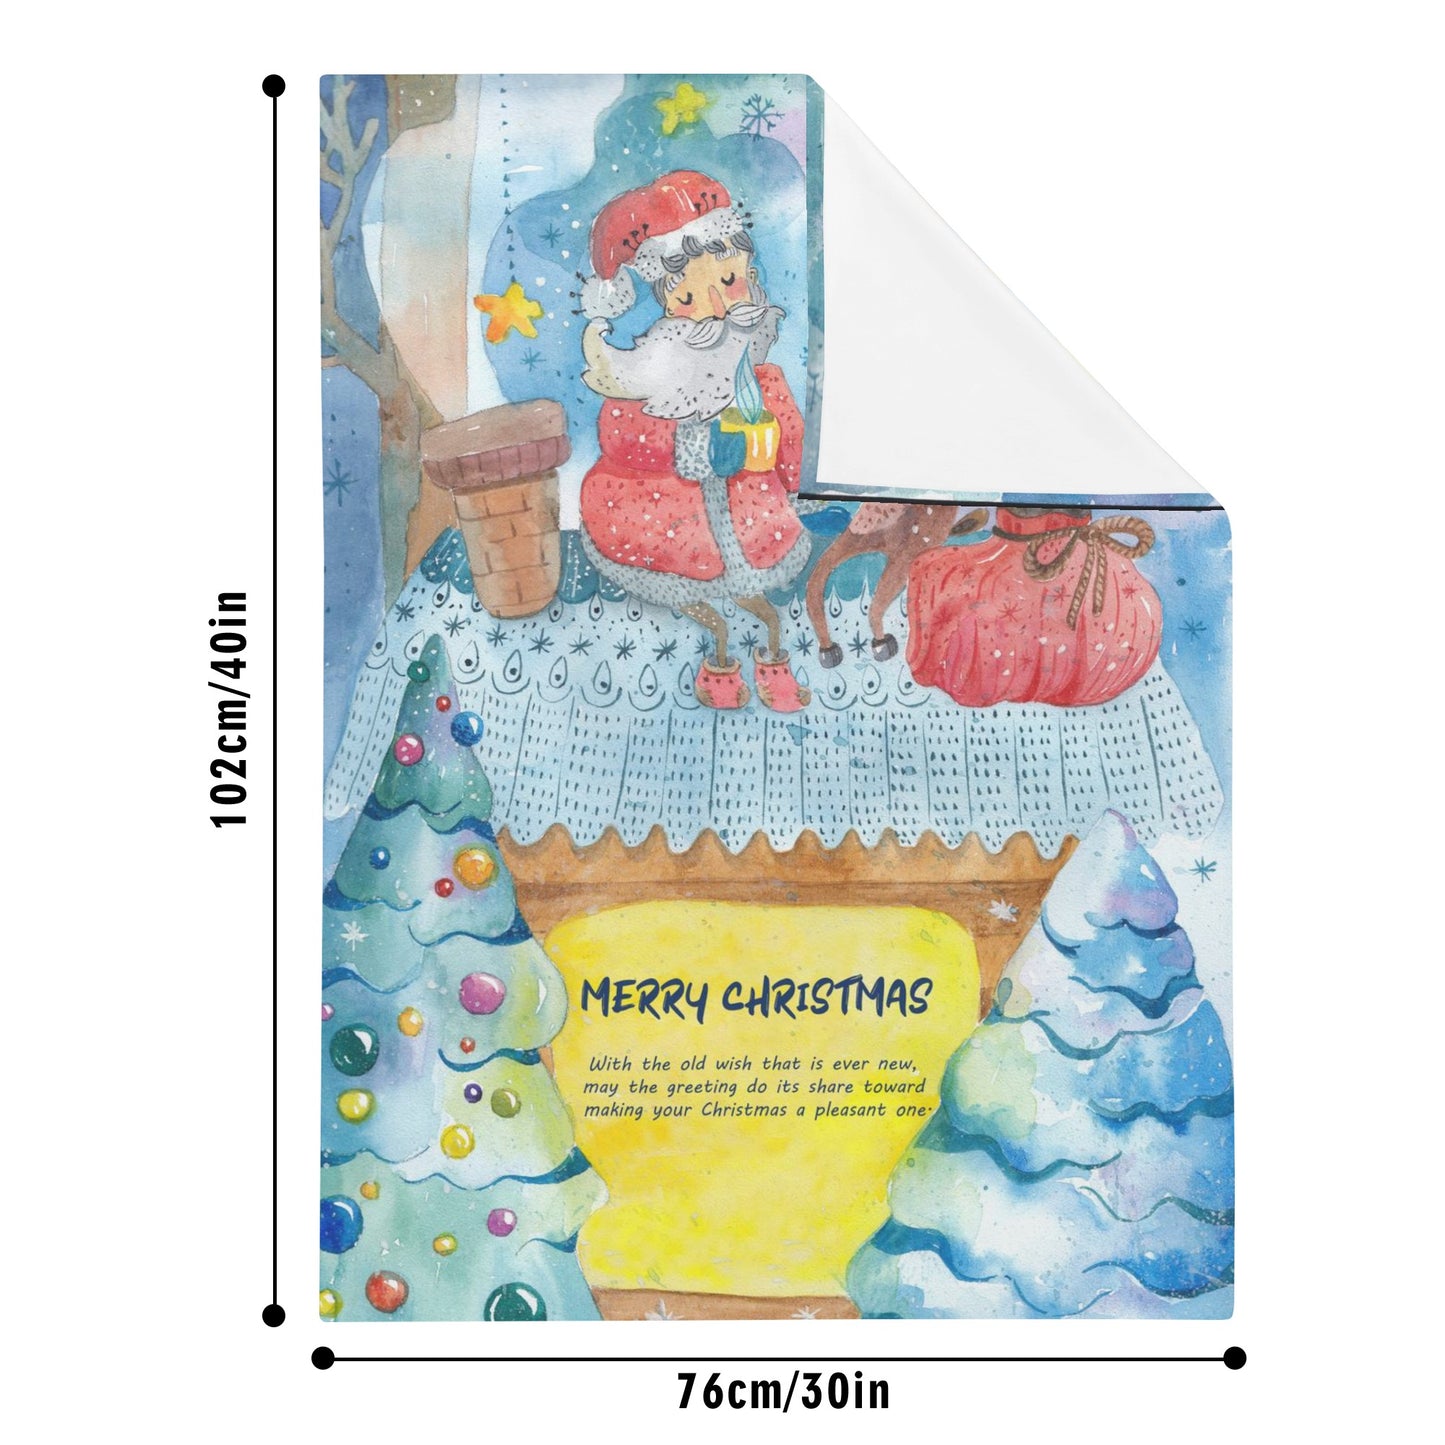 A Christmas Wish Soft Flannel Breathable Blanket for Babies and Tots